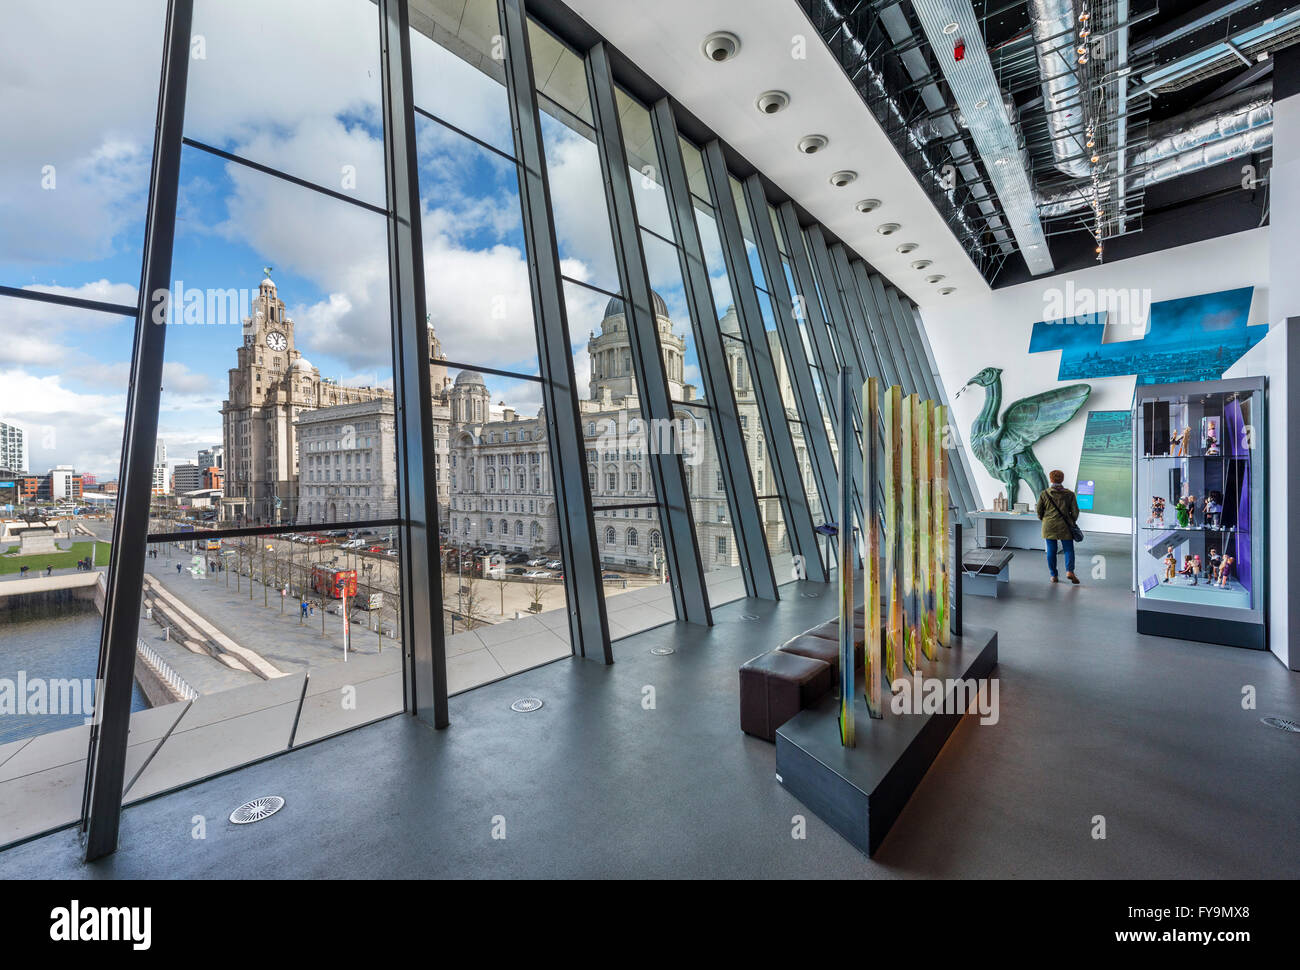 Interior of the Museum of Liverpool looking out over the Three Graces, Pier Head, Liverpool, Merseyside, England, UK Stock Photo